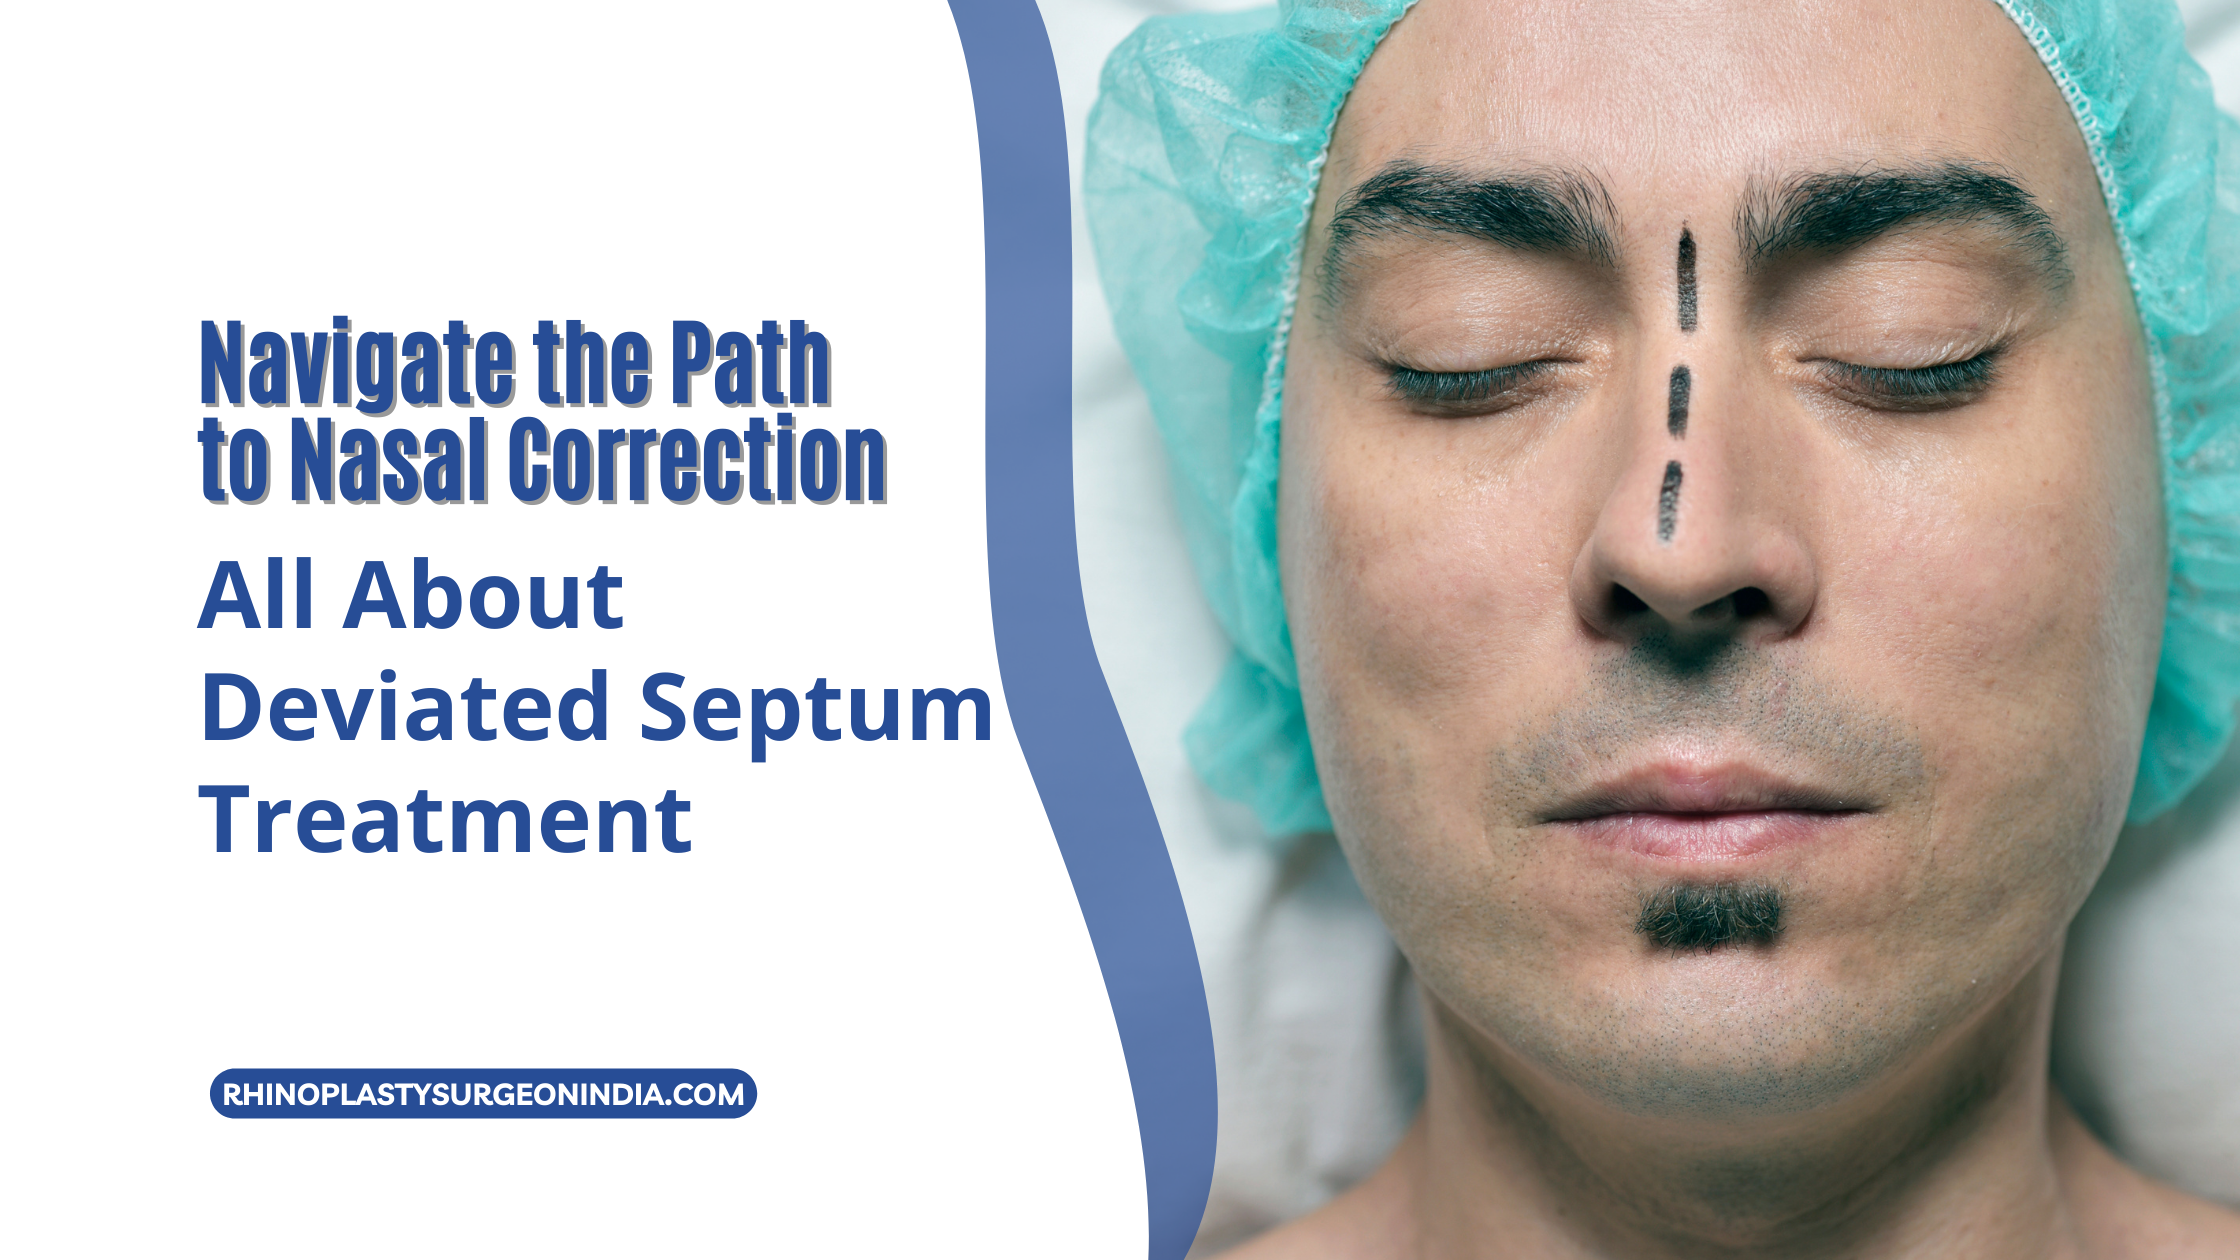 Navigate the Path to Nasal Correction All About Deviated Septum Treatment